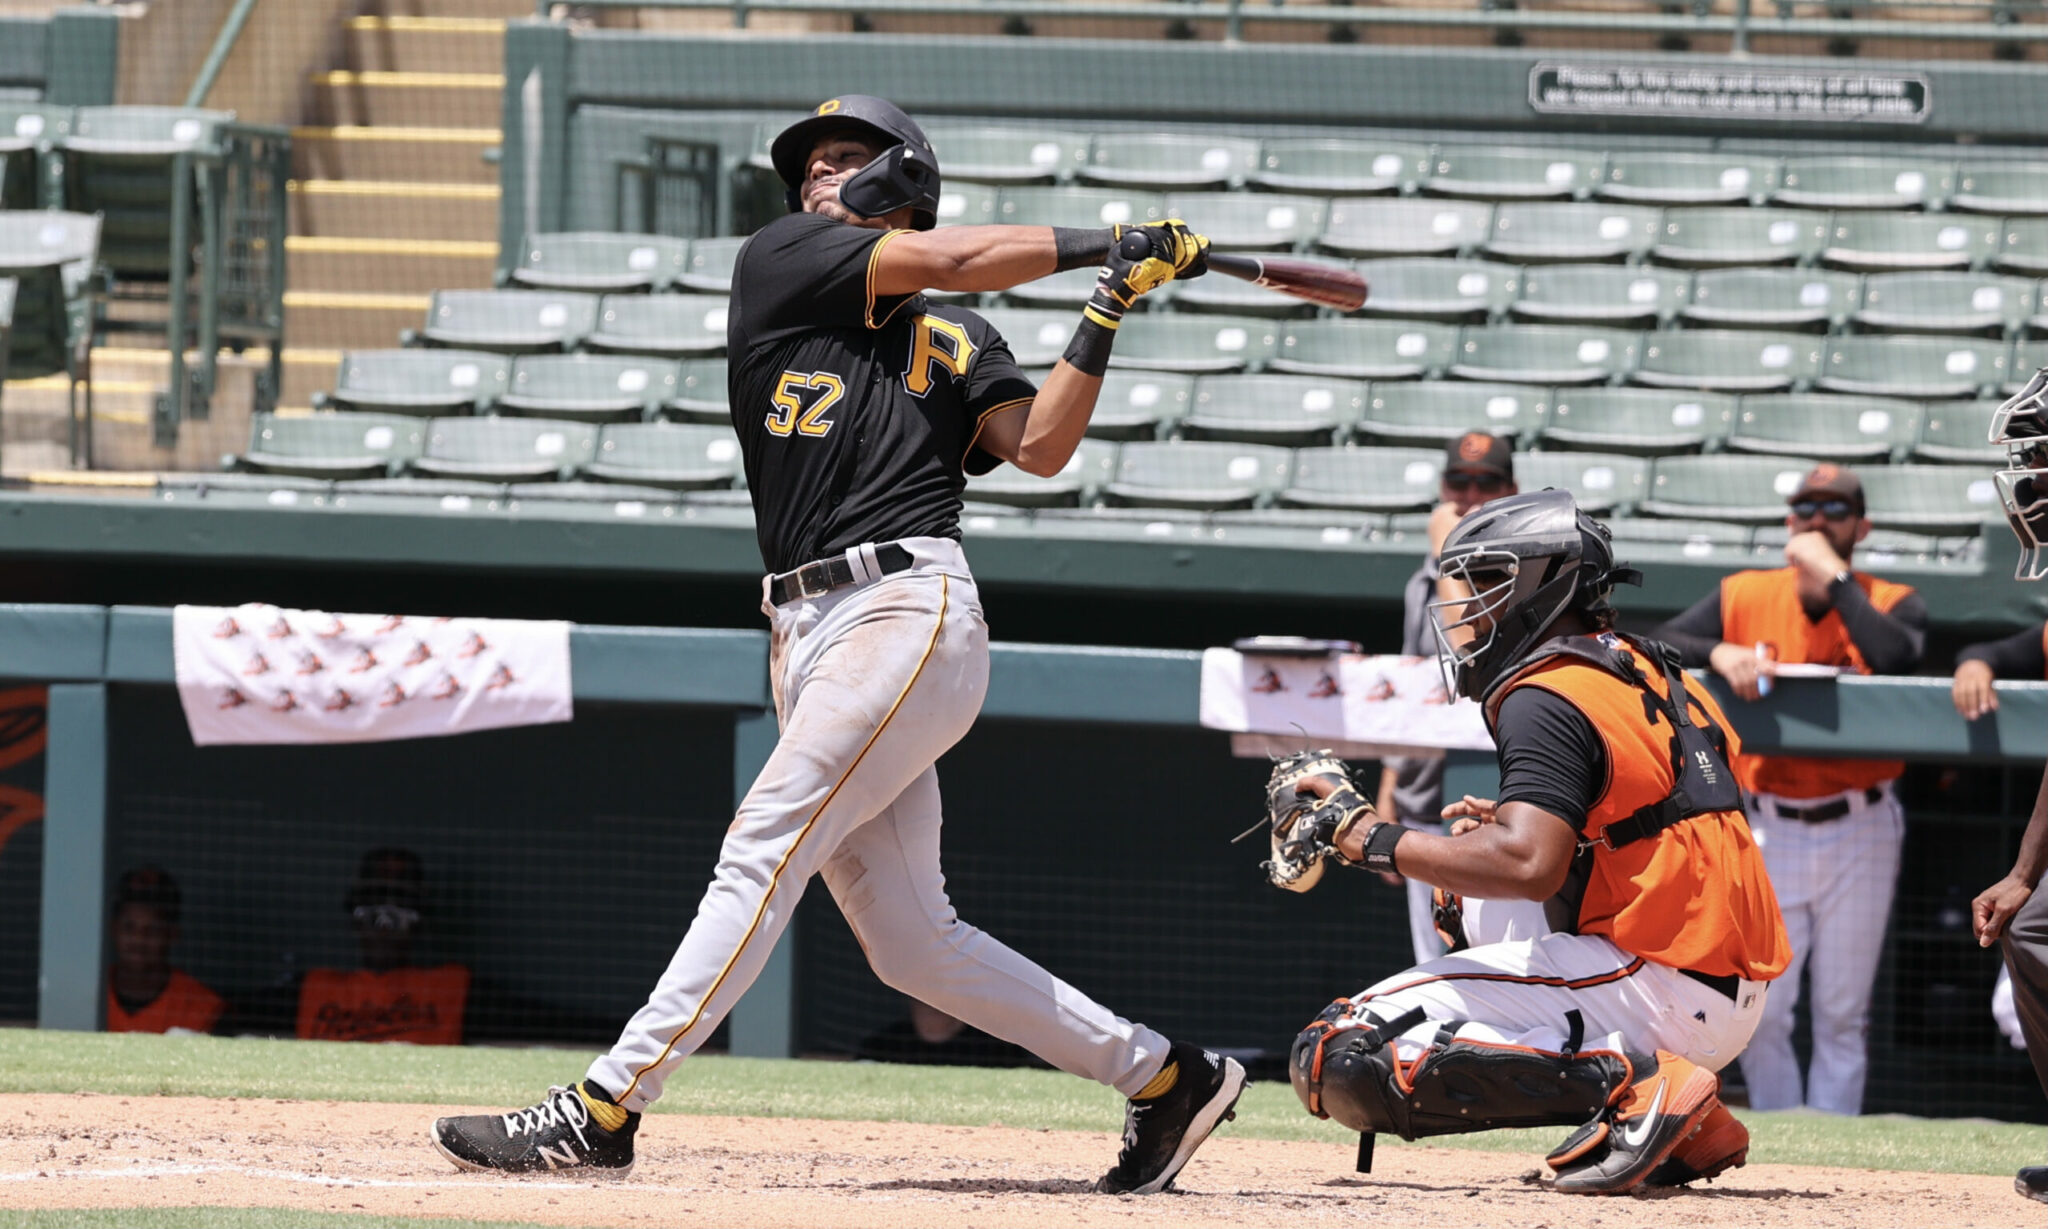 Pirates Prospects Daily: The Difference Between Injury Prone and Freak Injury